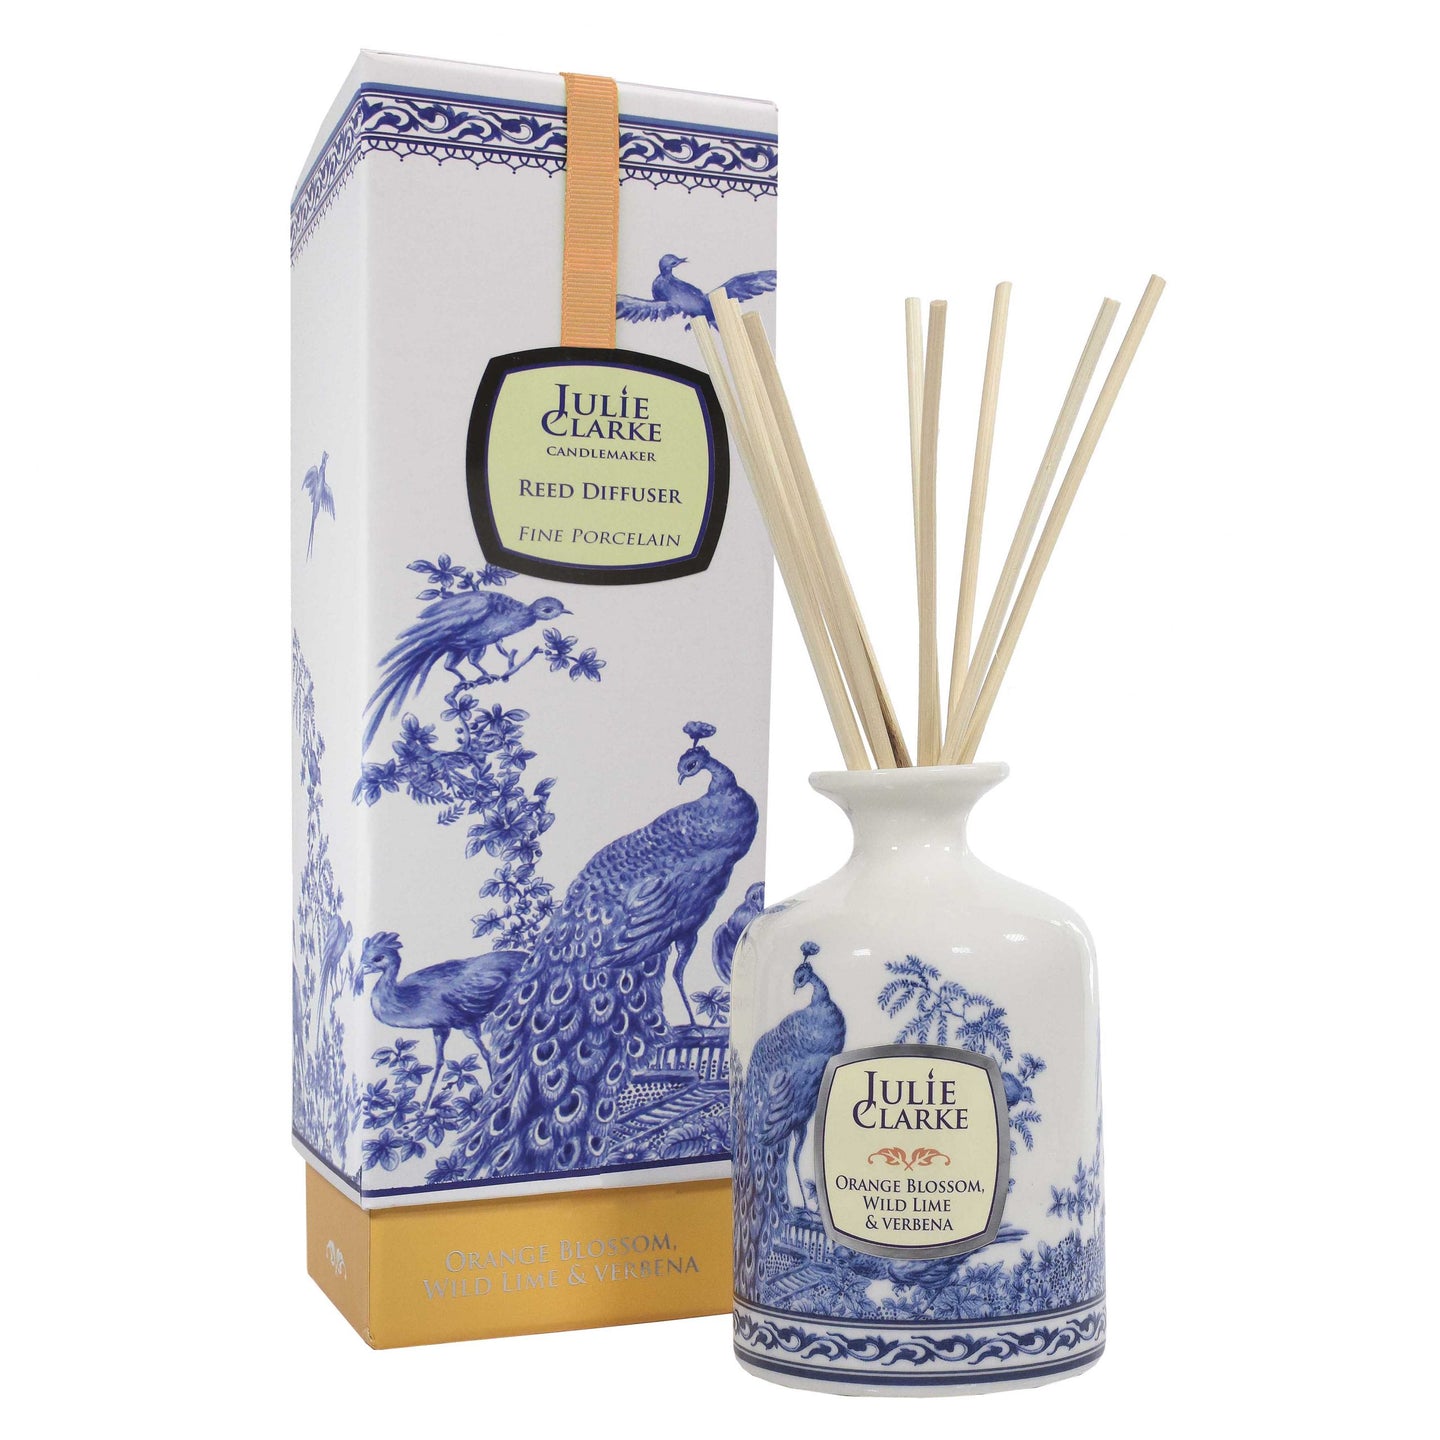 JULIE CLARKE - MADAGASCAR VANILLA & AMBER DIFFUSER Mrs Tea's Boutique and Bakery